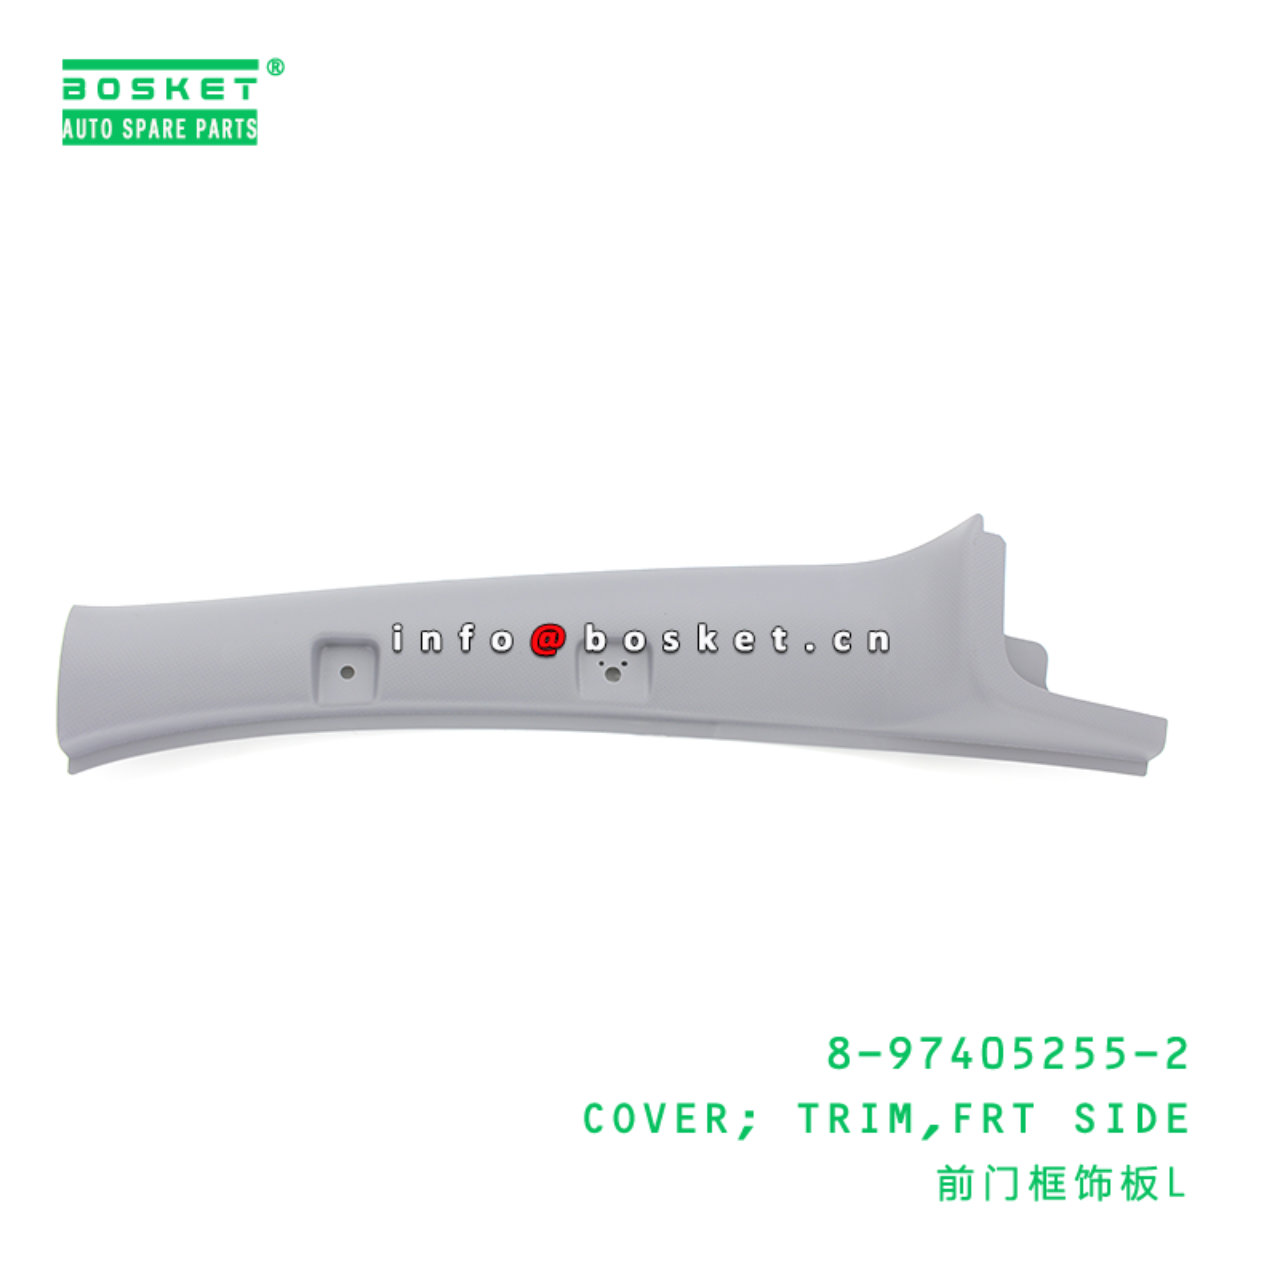 8-97405255-2 Front Side Trim Cover Suitable for ISUZU 700P 8974052552